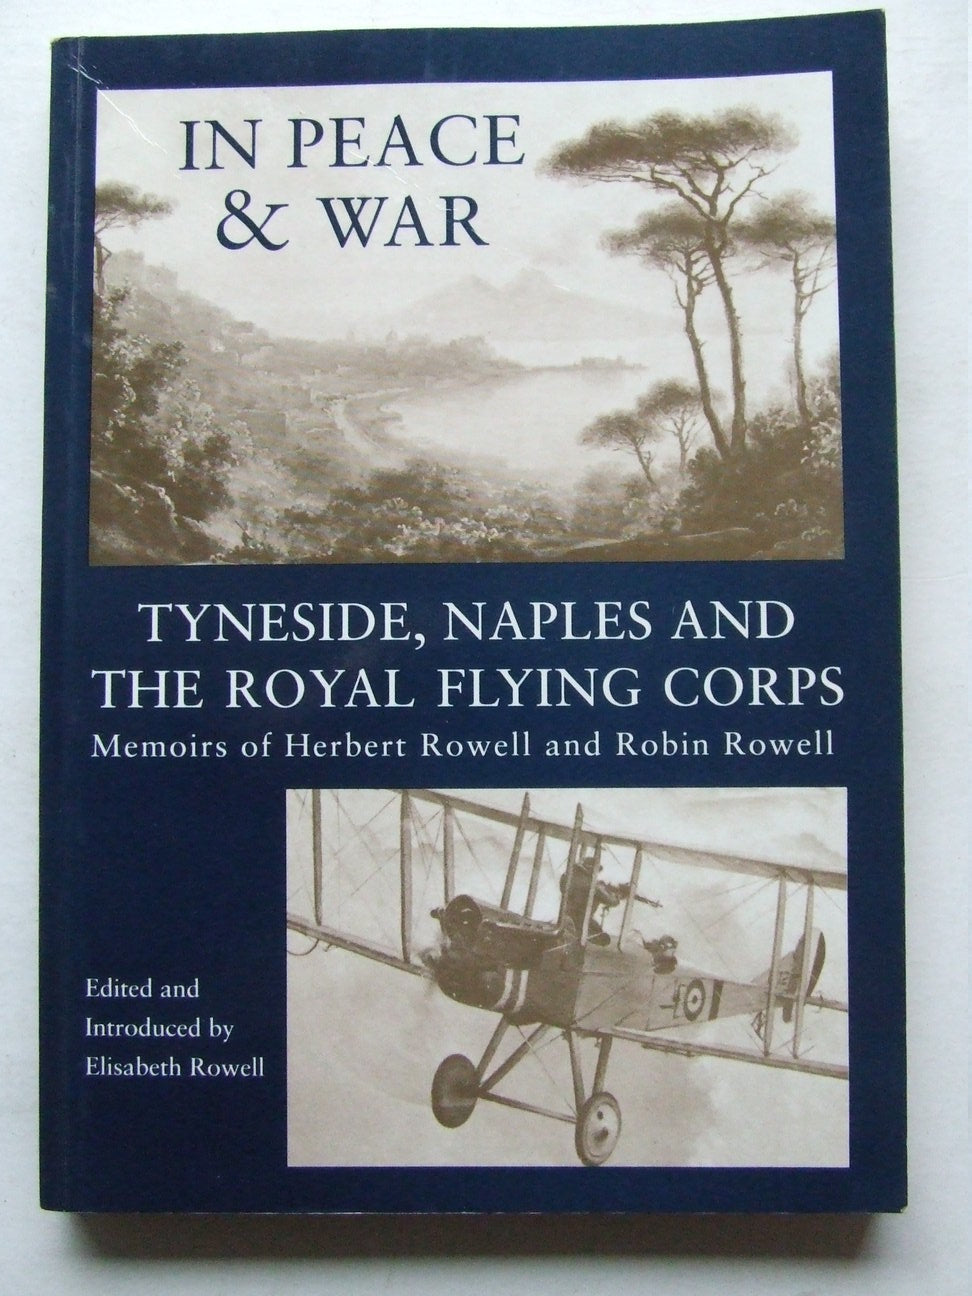 In Peace & War, Tyneside, Naples and the Royal Flying Corps